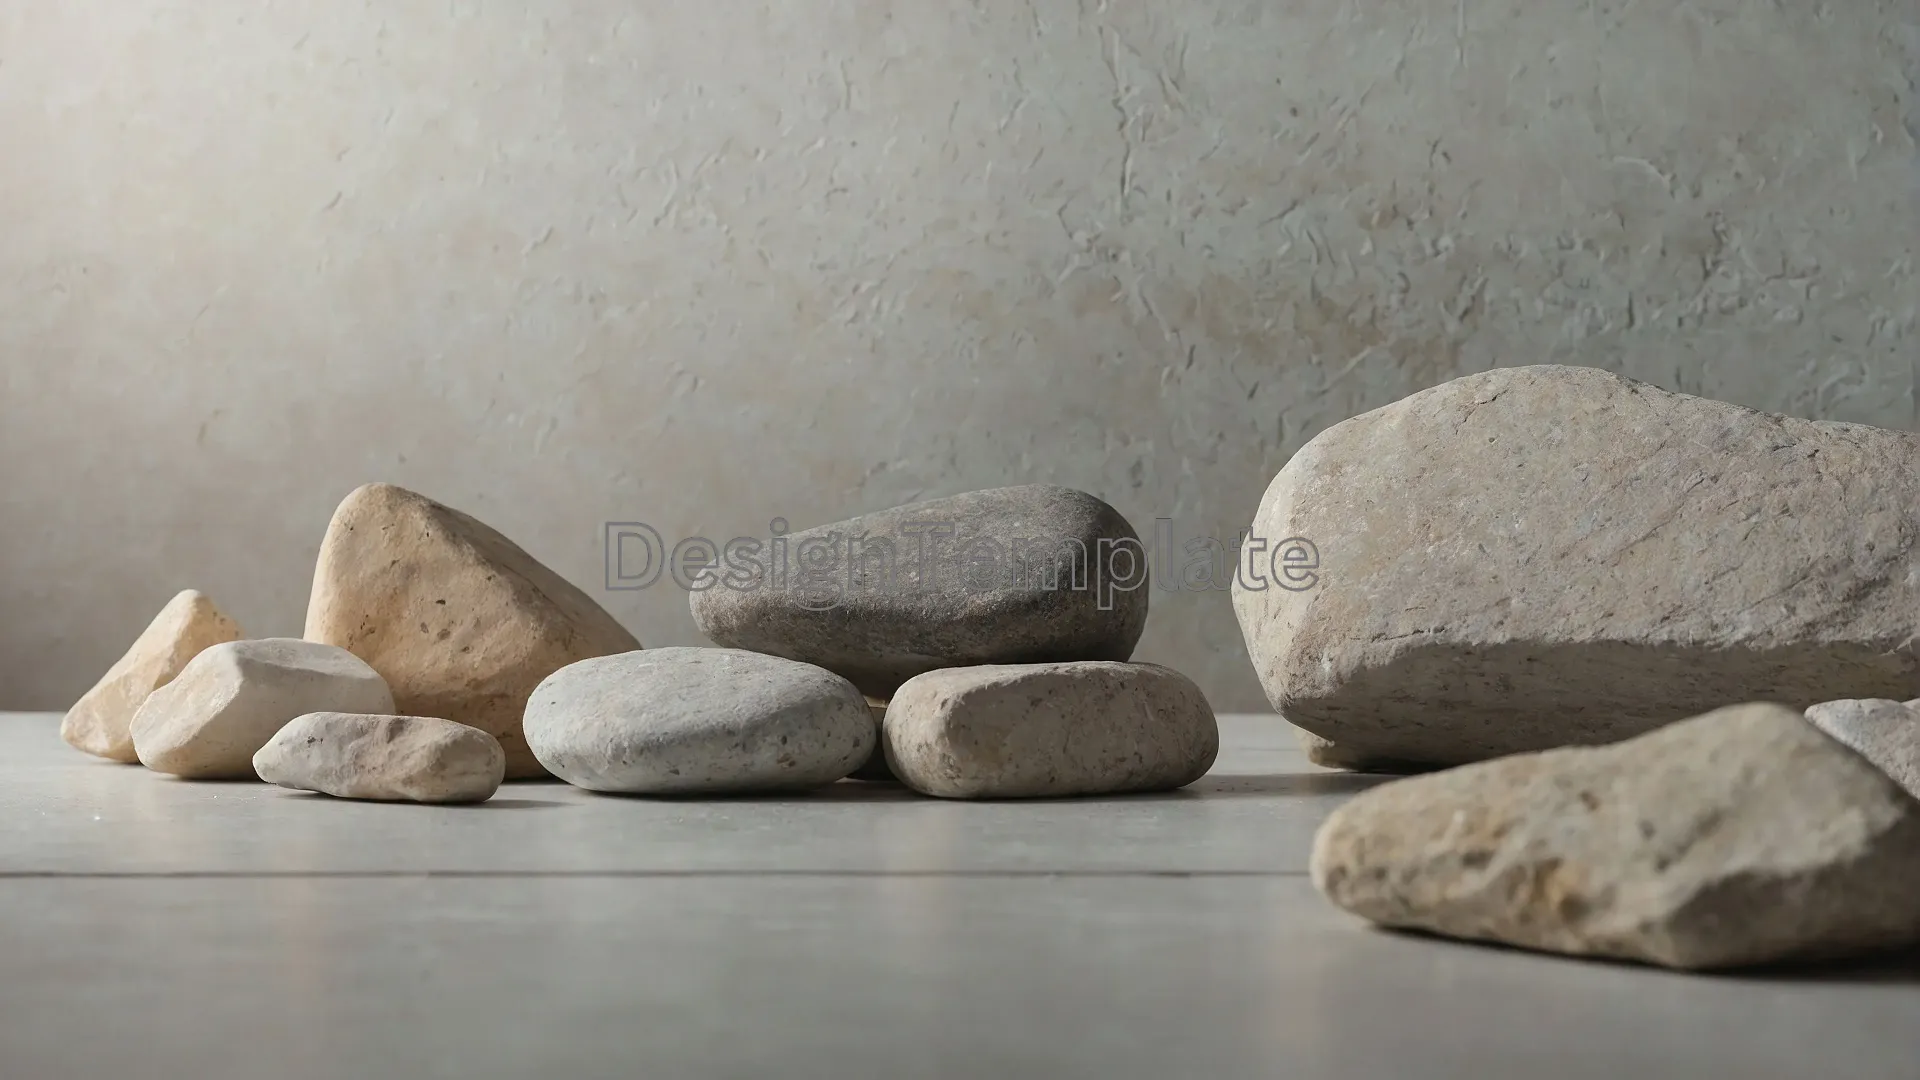 Natural Stone and Shelf Texture Background